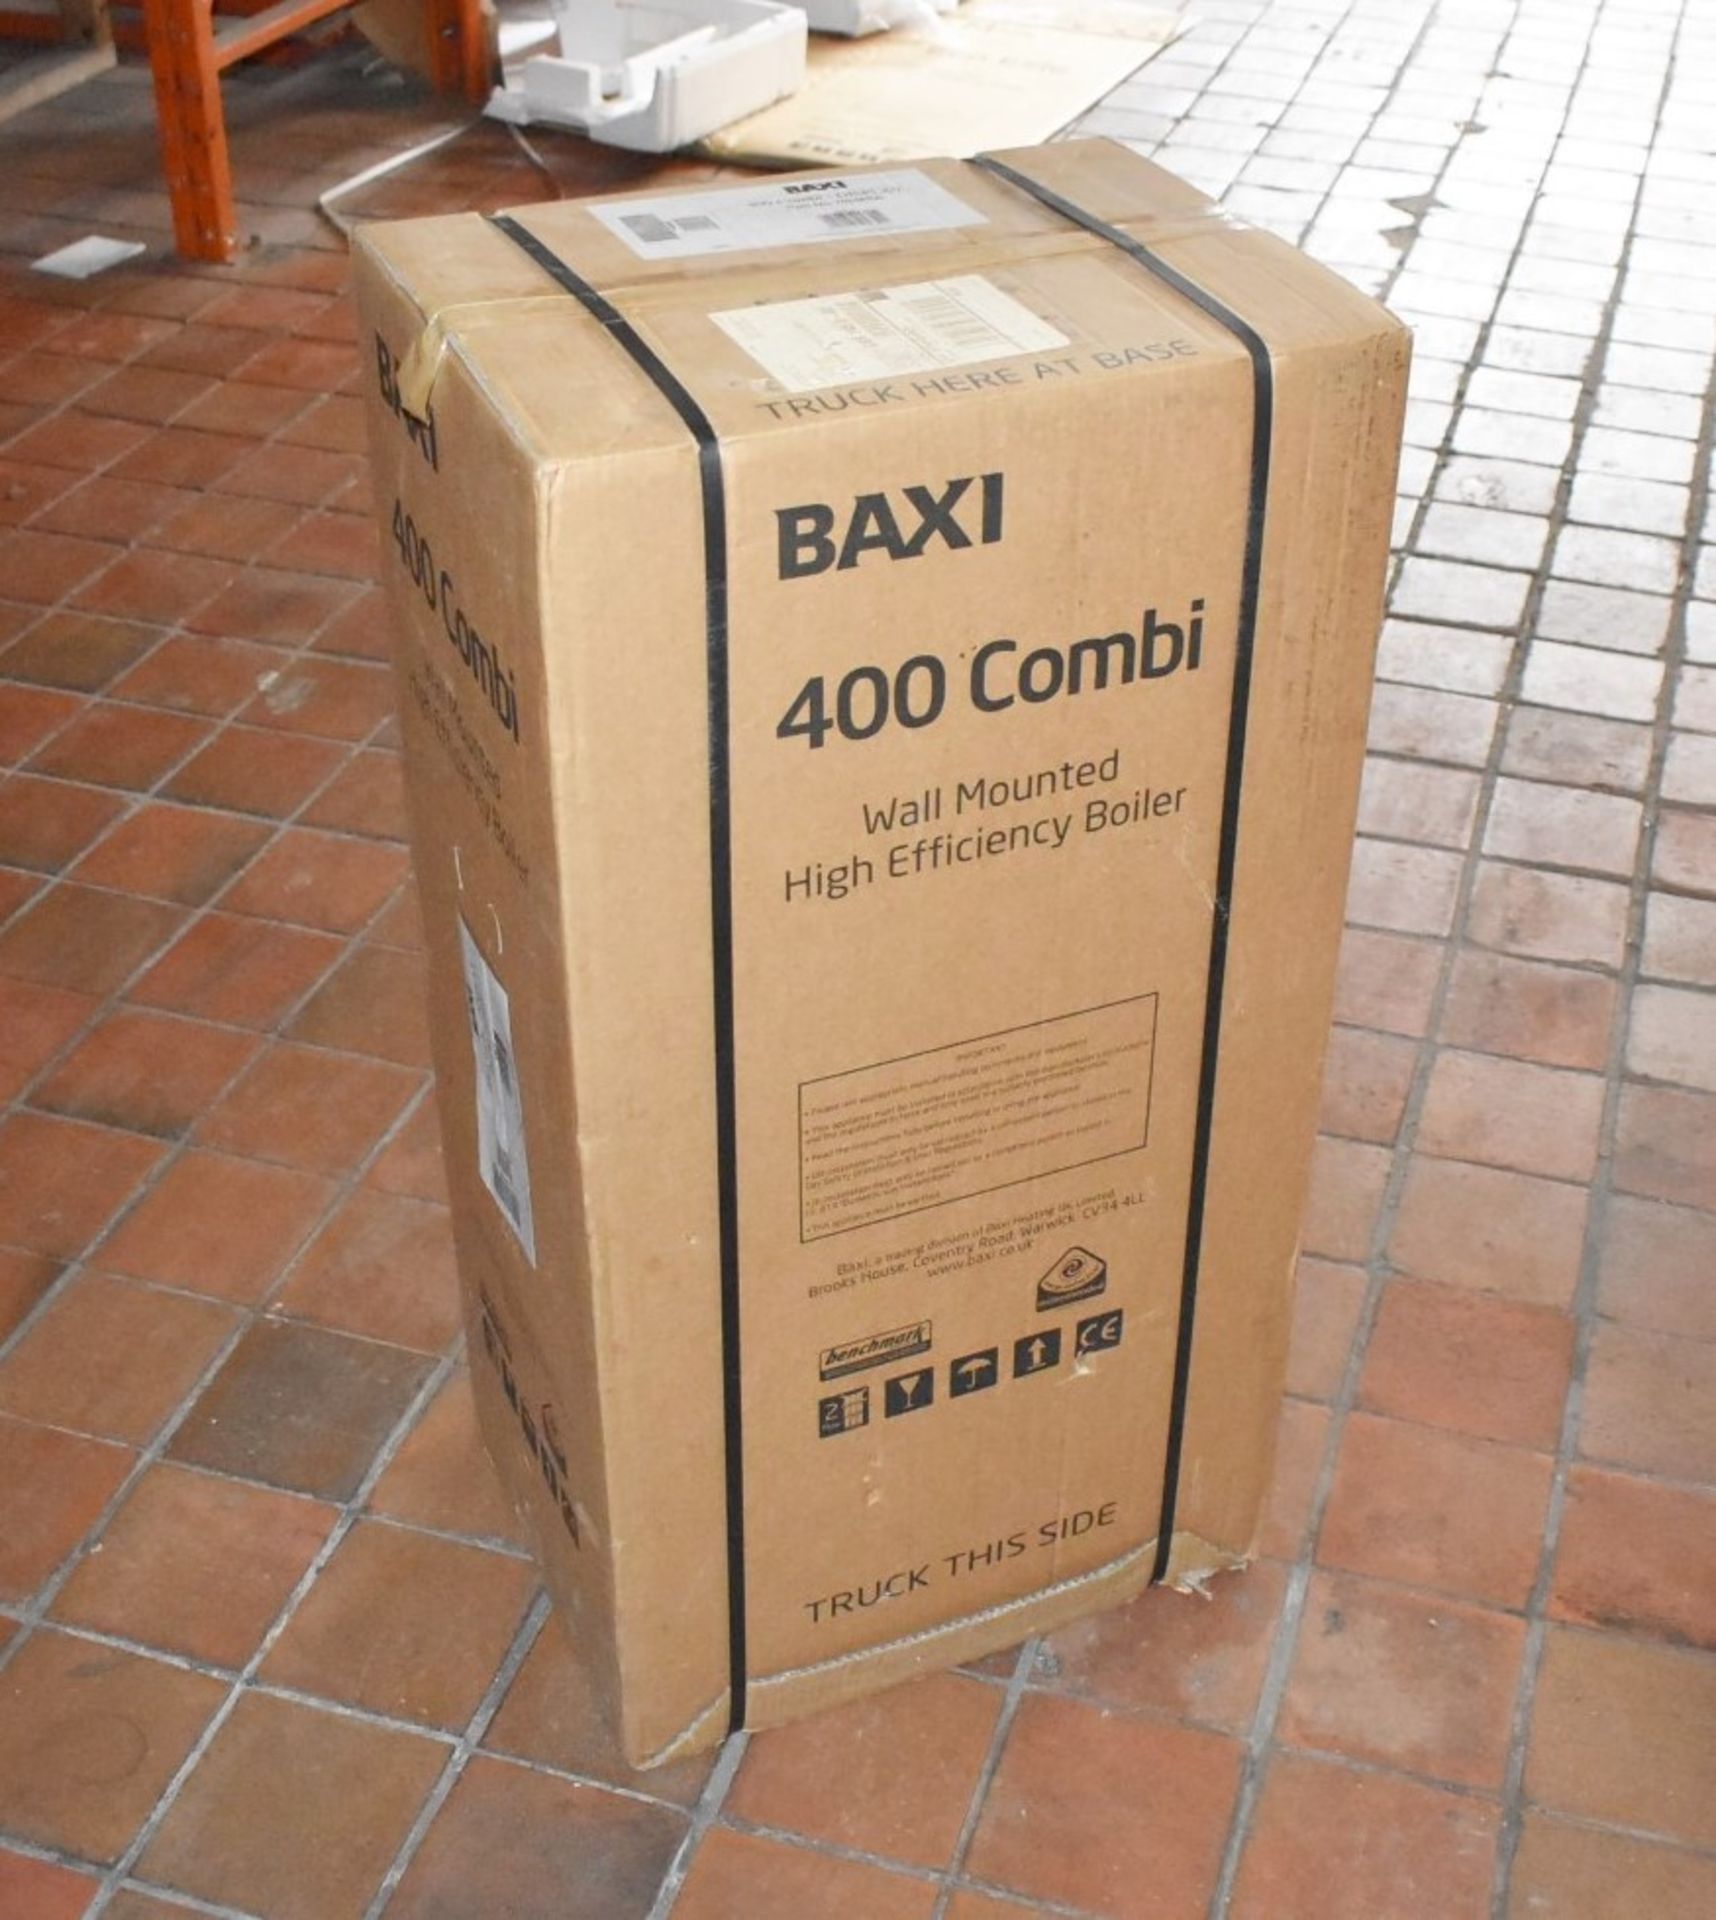 1 x BAXI 400 Wall Mounted Combi Boiler - Dummy Display Item - New and Sealed